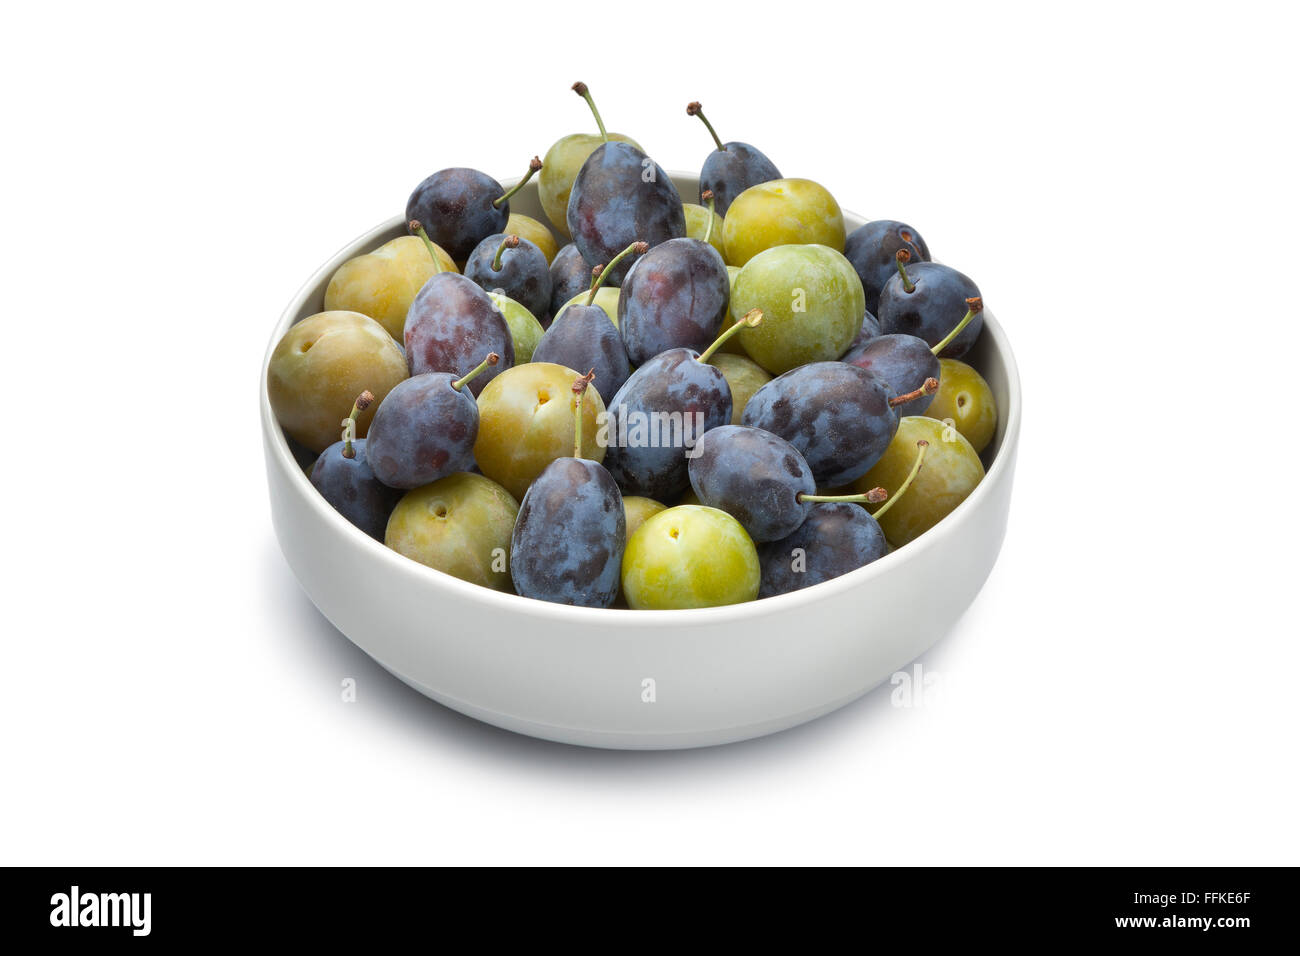 Bowl with fresh Damson and Reine Claude plums on white background Stock Photo